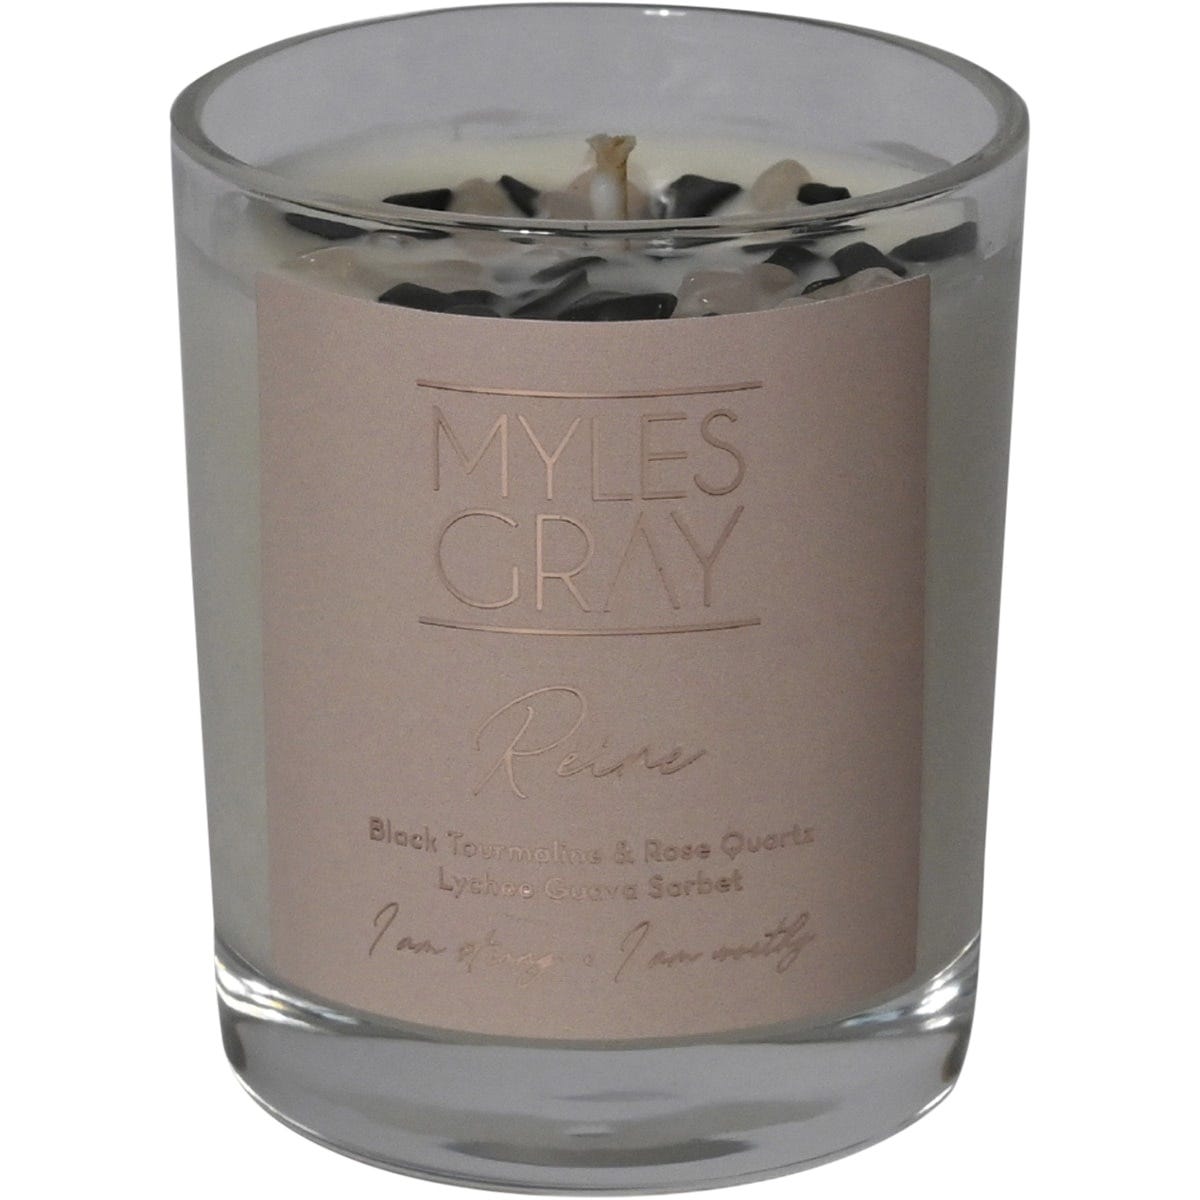 Myles Gray Crystal Infused Soy Candle Mini Lychee Guava Sorbet